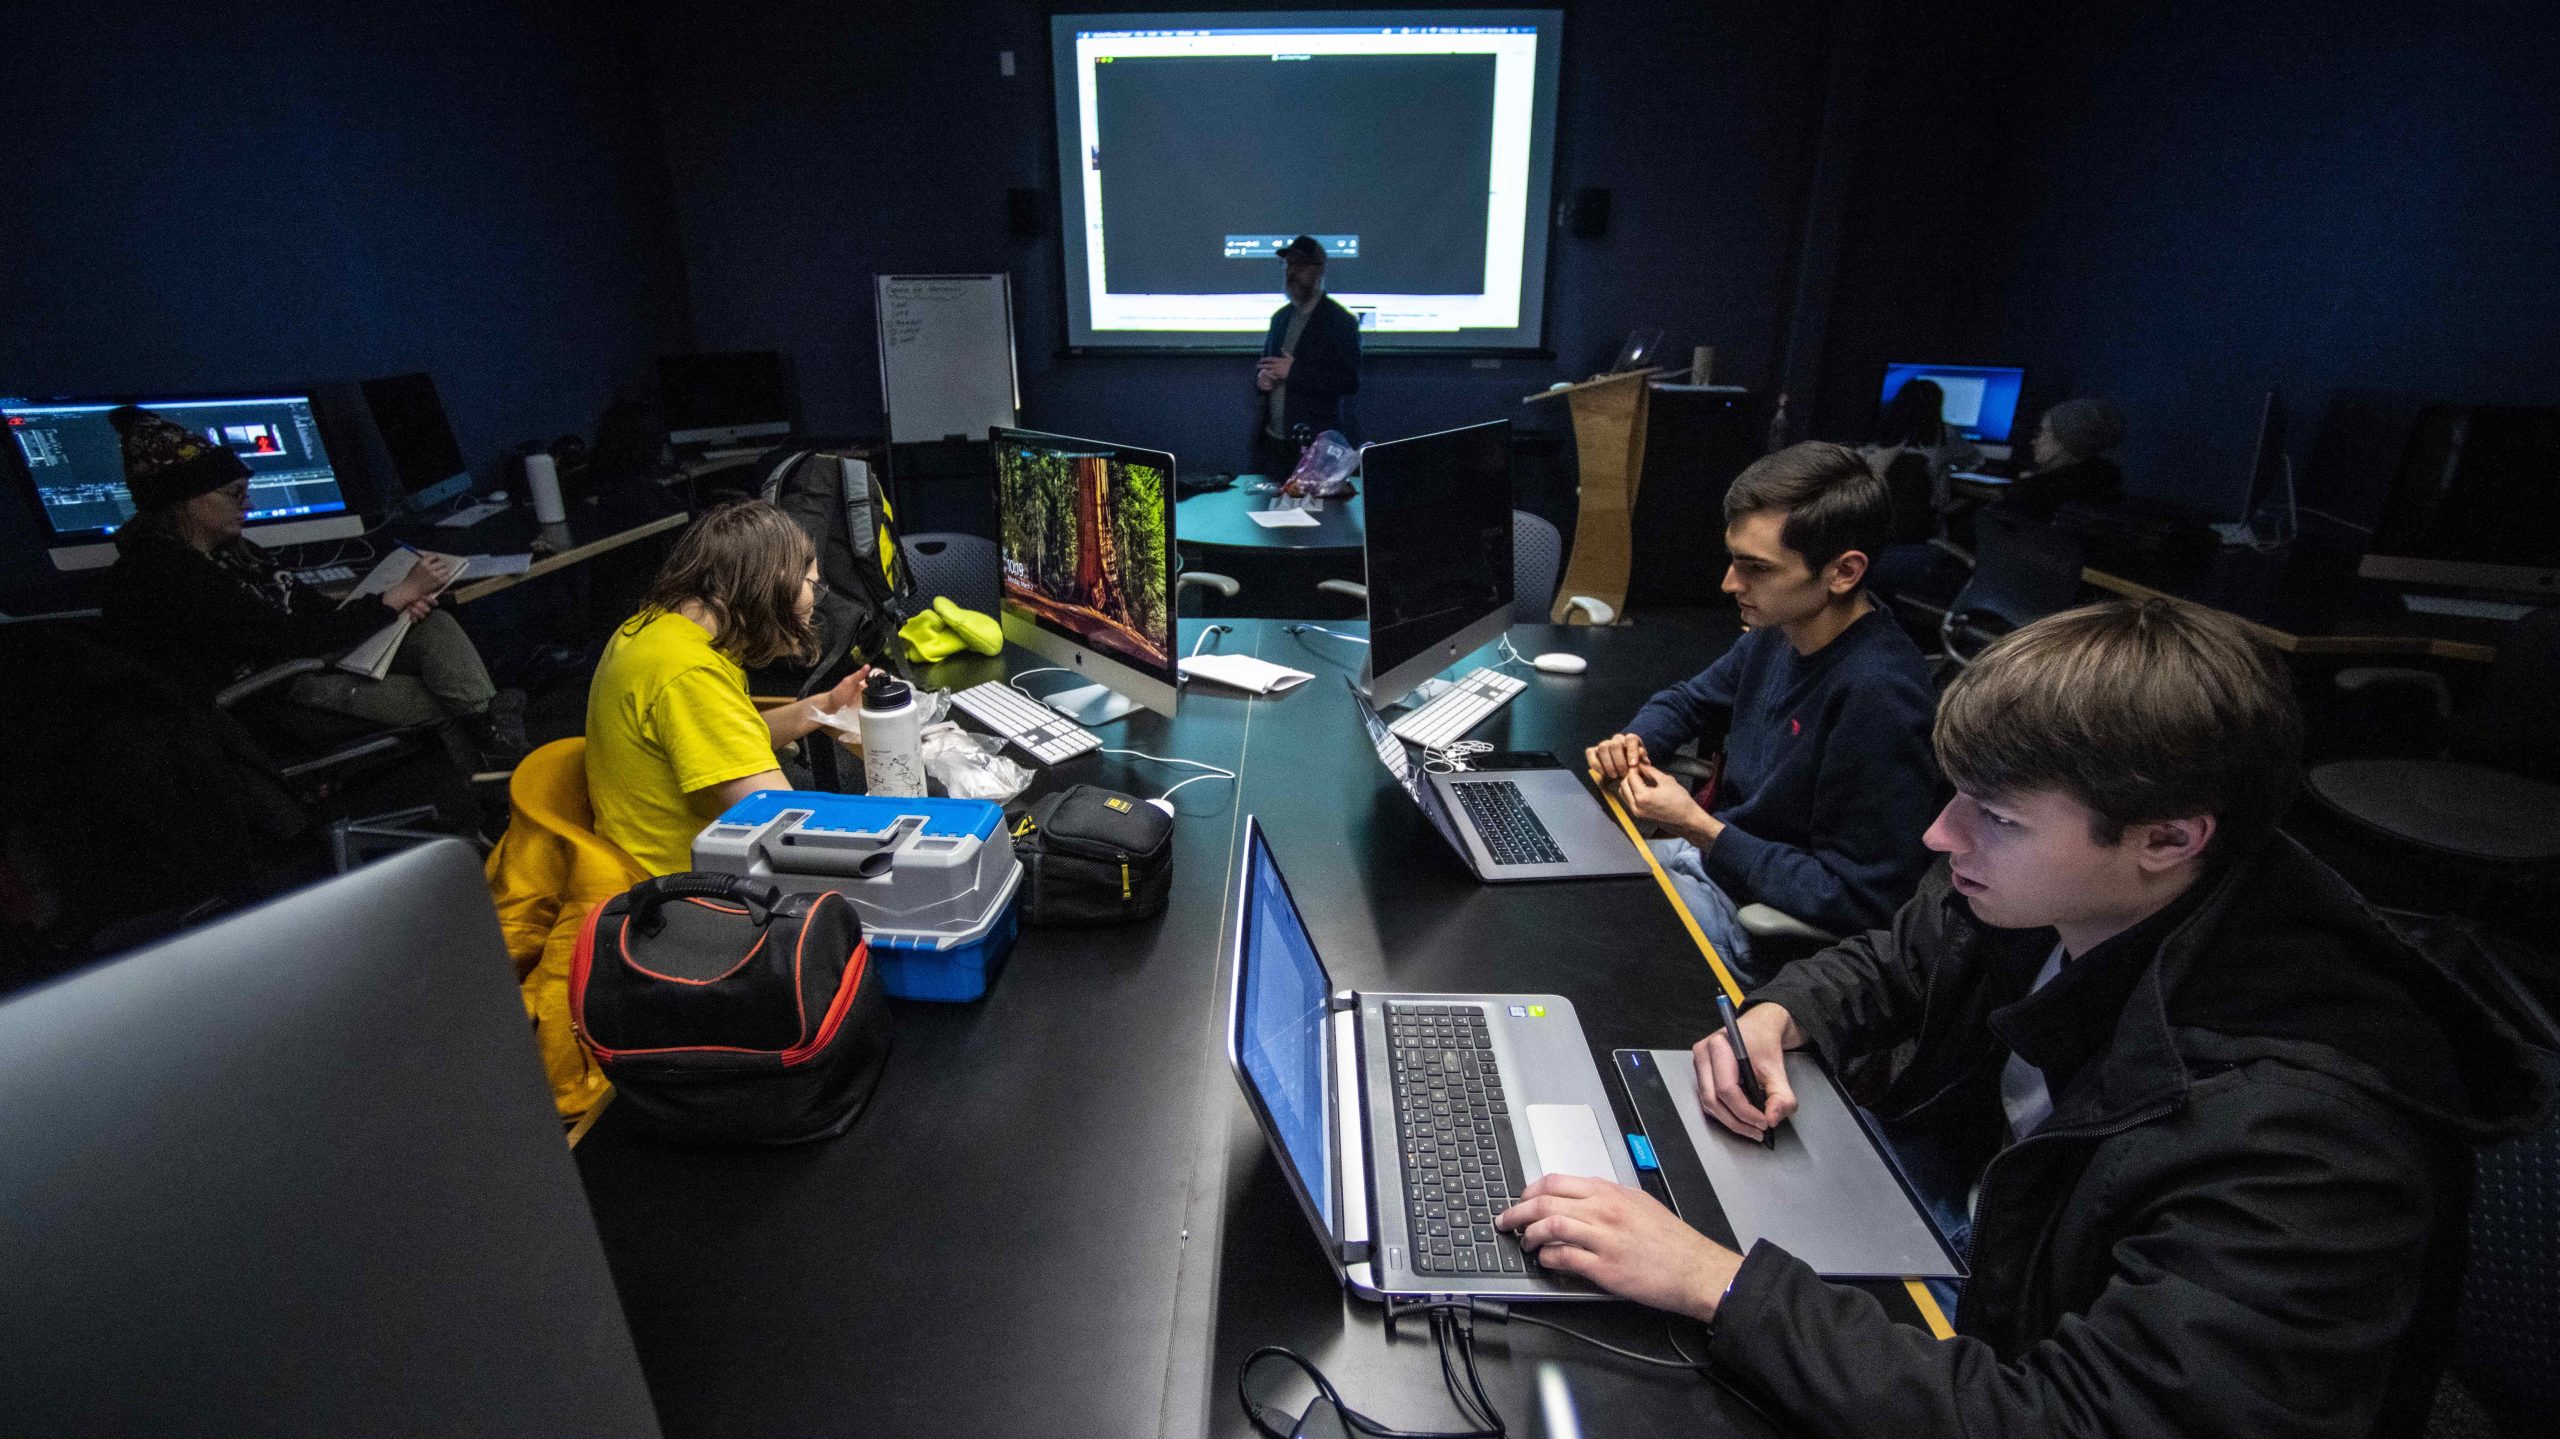 Student in class using computers in the IMRC Center computer lab